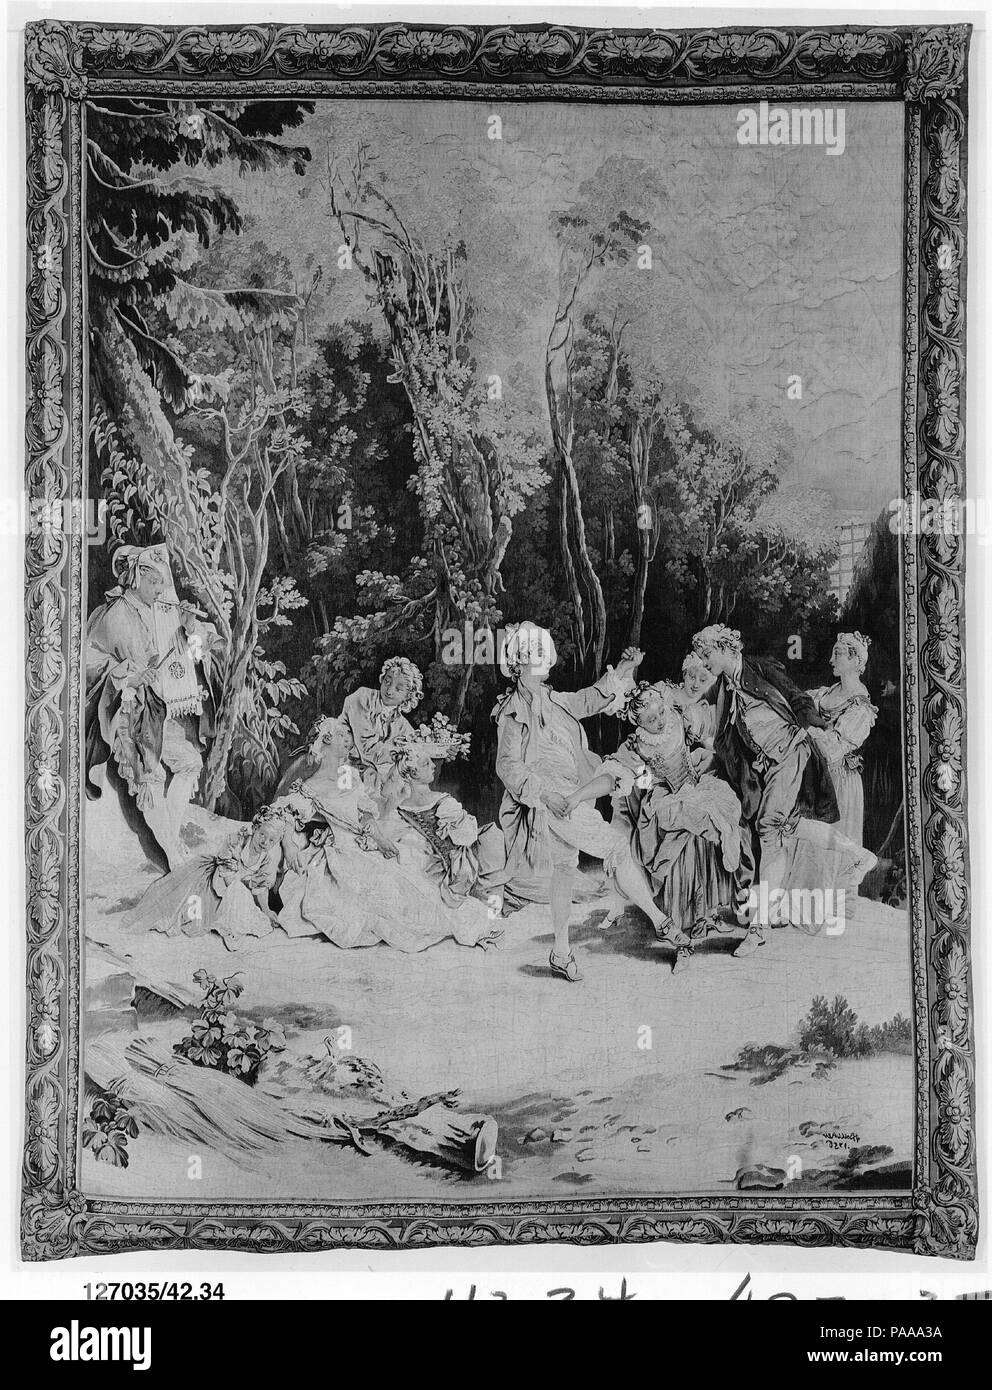 The Dance from a set of the Italian Village Scenes. Culture: French, Beauvais. Designer: François Boucher (French, Paris 1703-1770 Paris). Dimensions: H. 127 x W. 95 inches (322.6 x 241.3 cm). Maker: Workshop of Nicolas Besnier (French, 1686-1754, master 1714); Workshop of Jean-Baptiste Oudry (French, Paris 1686-1755 Beauvais). Manufactory: Beauvais. Date: ca. 1744-53.  Images of gardens were popular in the tapestry medium from the medieval era, where the so-called mille-fleurs (thousand flowers) (see also 2013.506) provided a decorative, and sometimes symbolic, setting for scenes of romance a Stock Photo